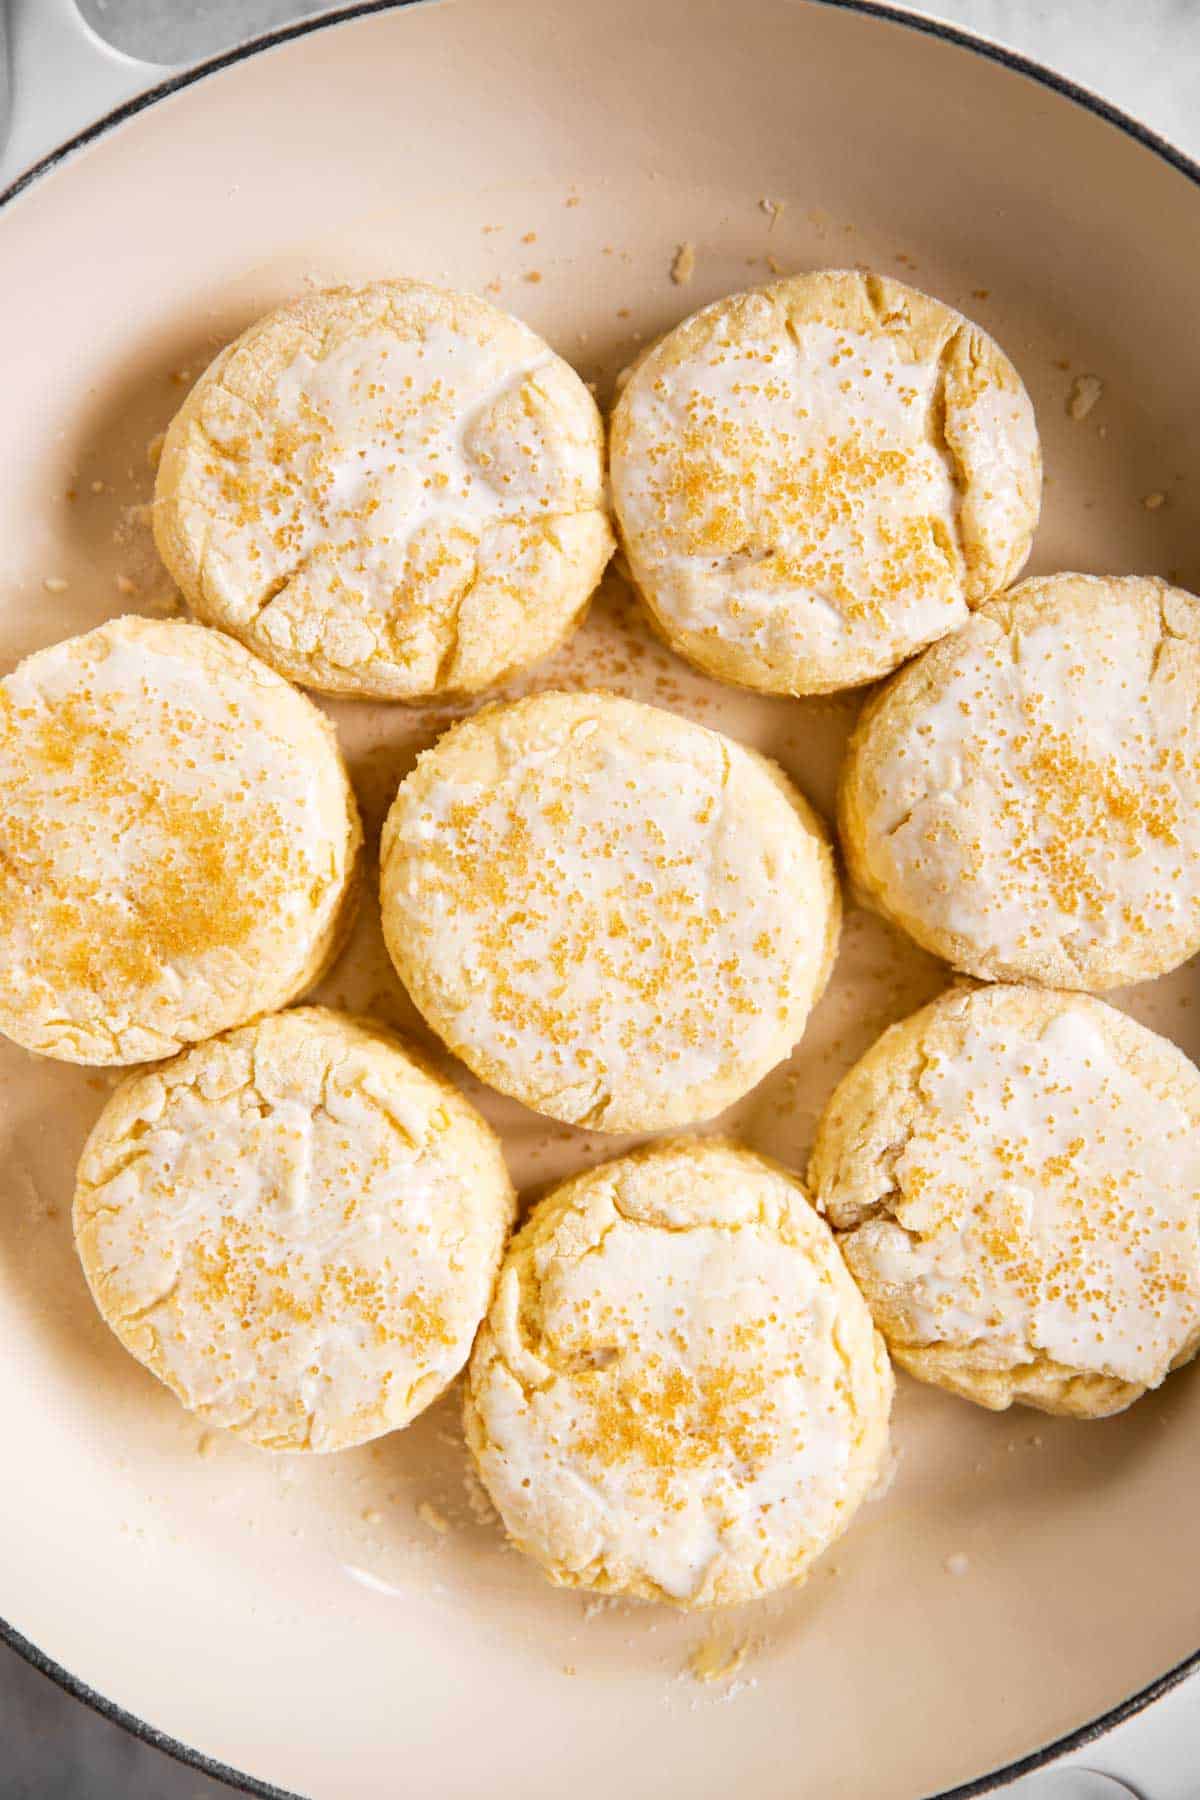 biscuits in skillet with coarse sugar on top